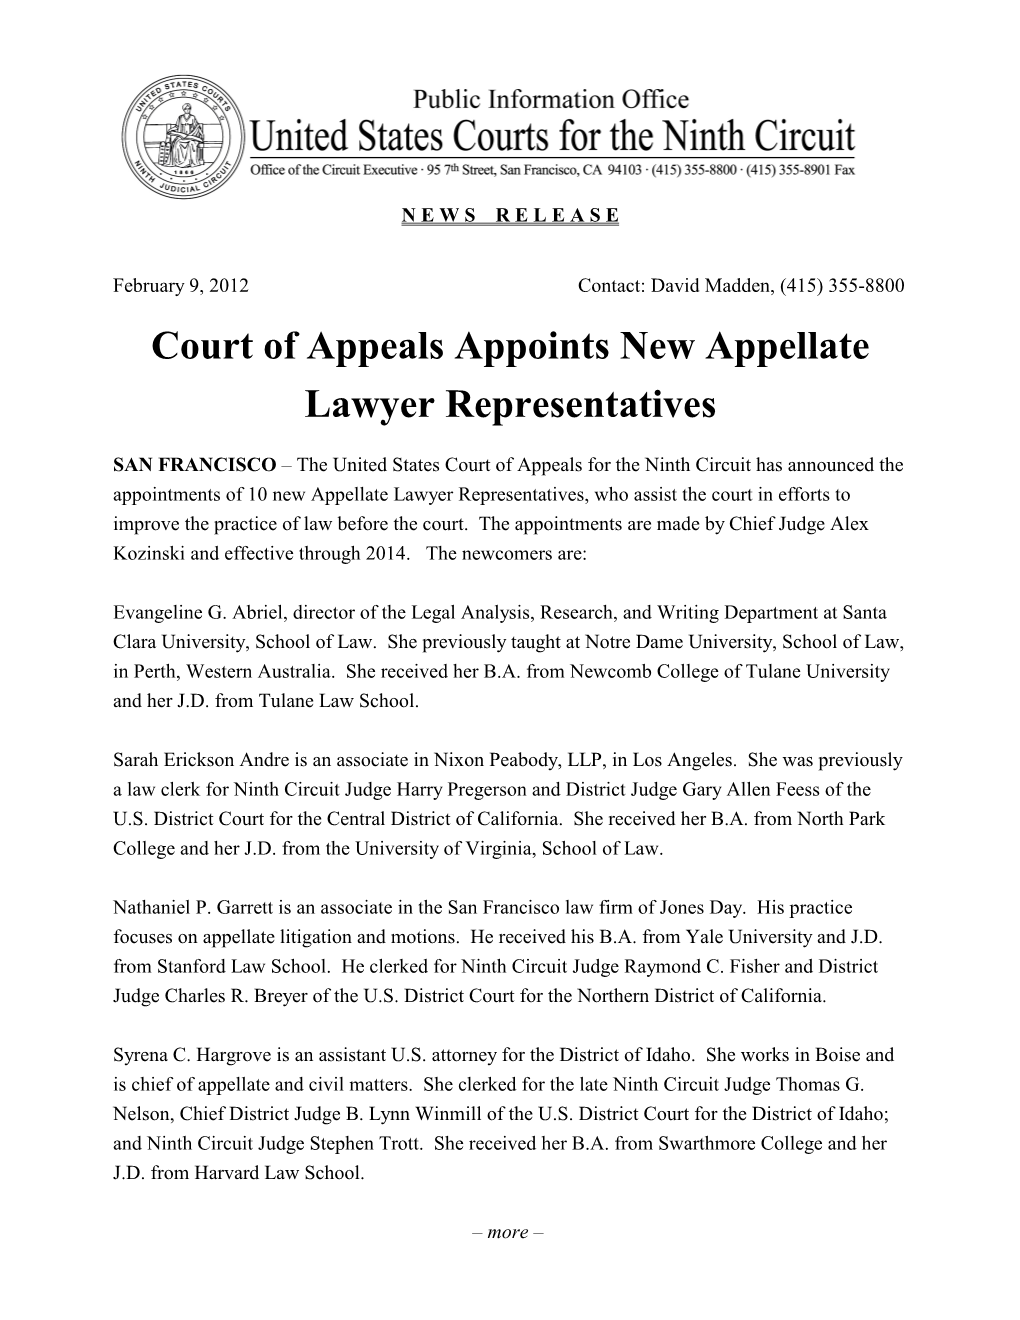 Court of Appeals Appoints New Appellate Lawyer Representatives